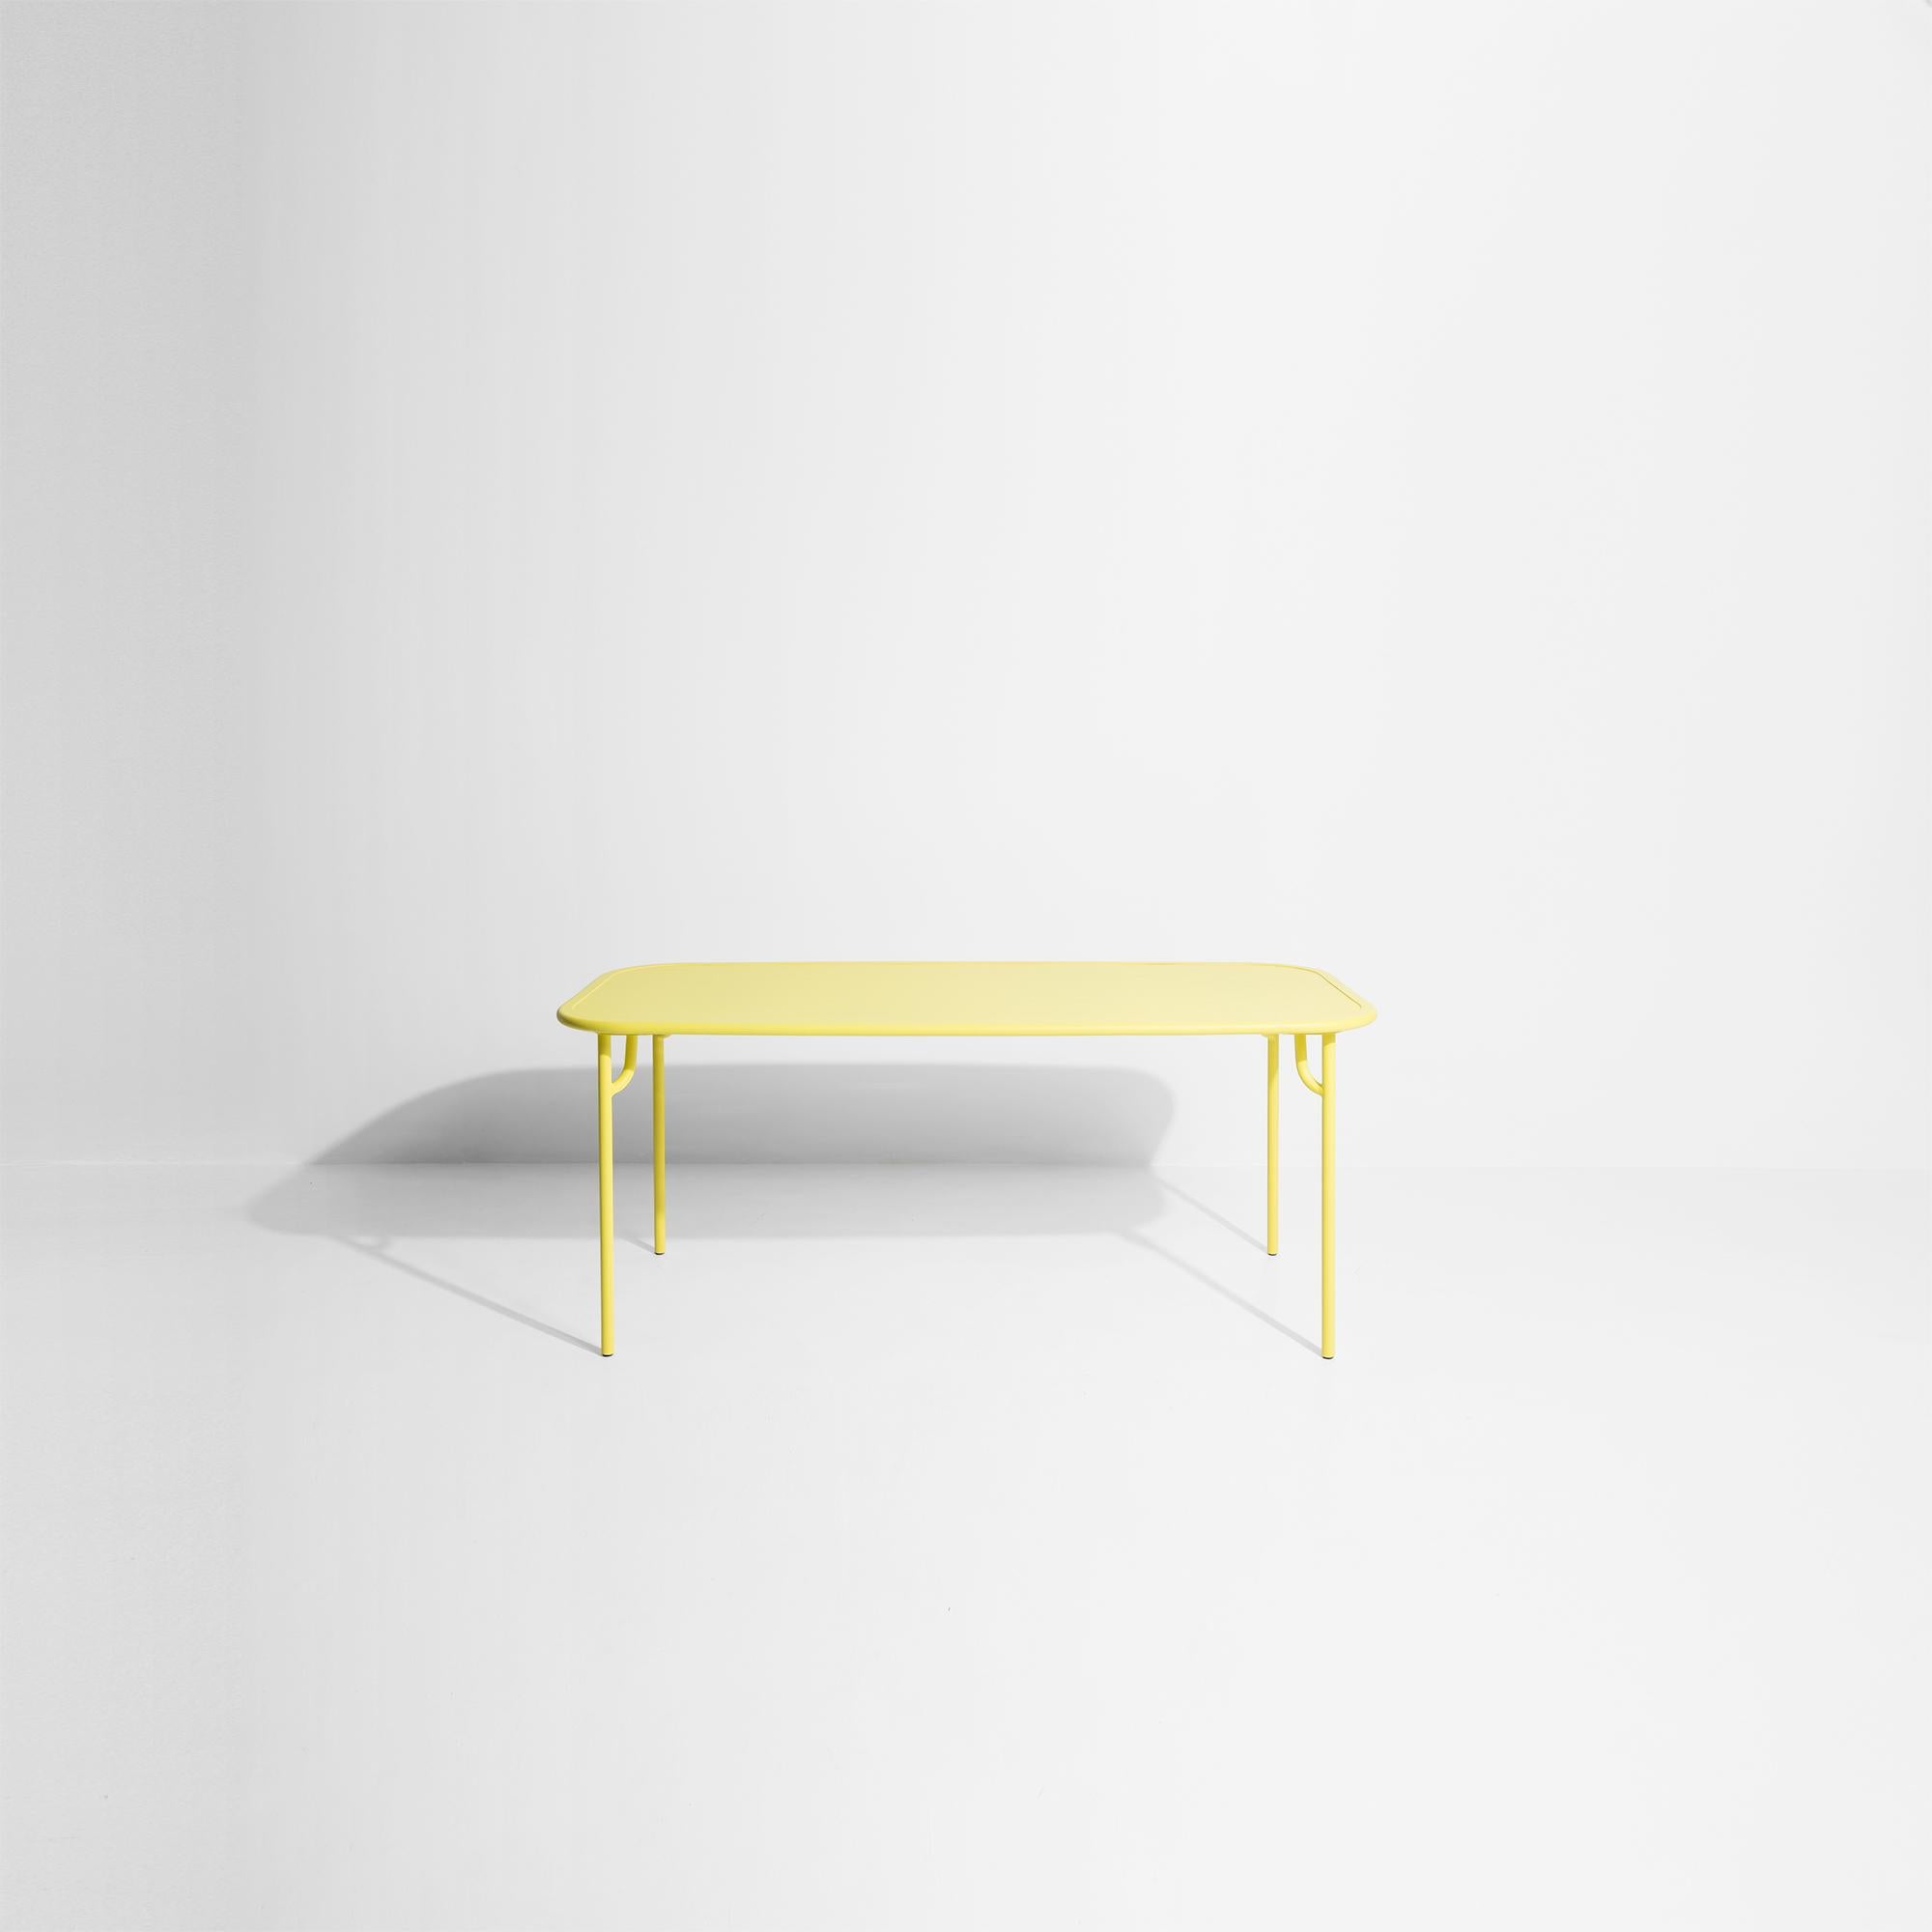 Contemporary Petite Friture Week-End Medium Plain Rectangular Dining Table in Yellow, 2017 For Sale